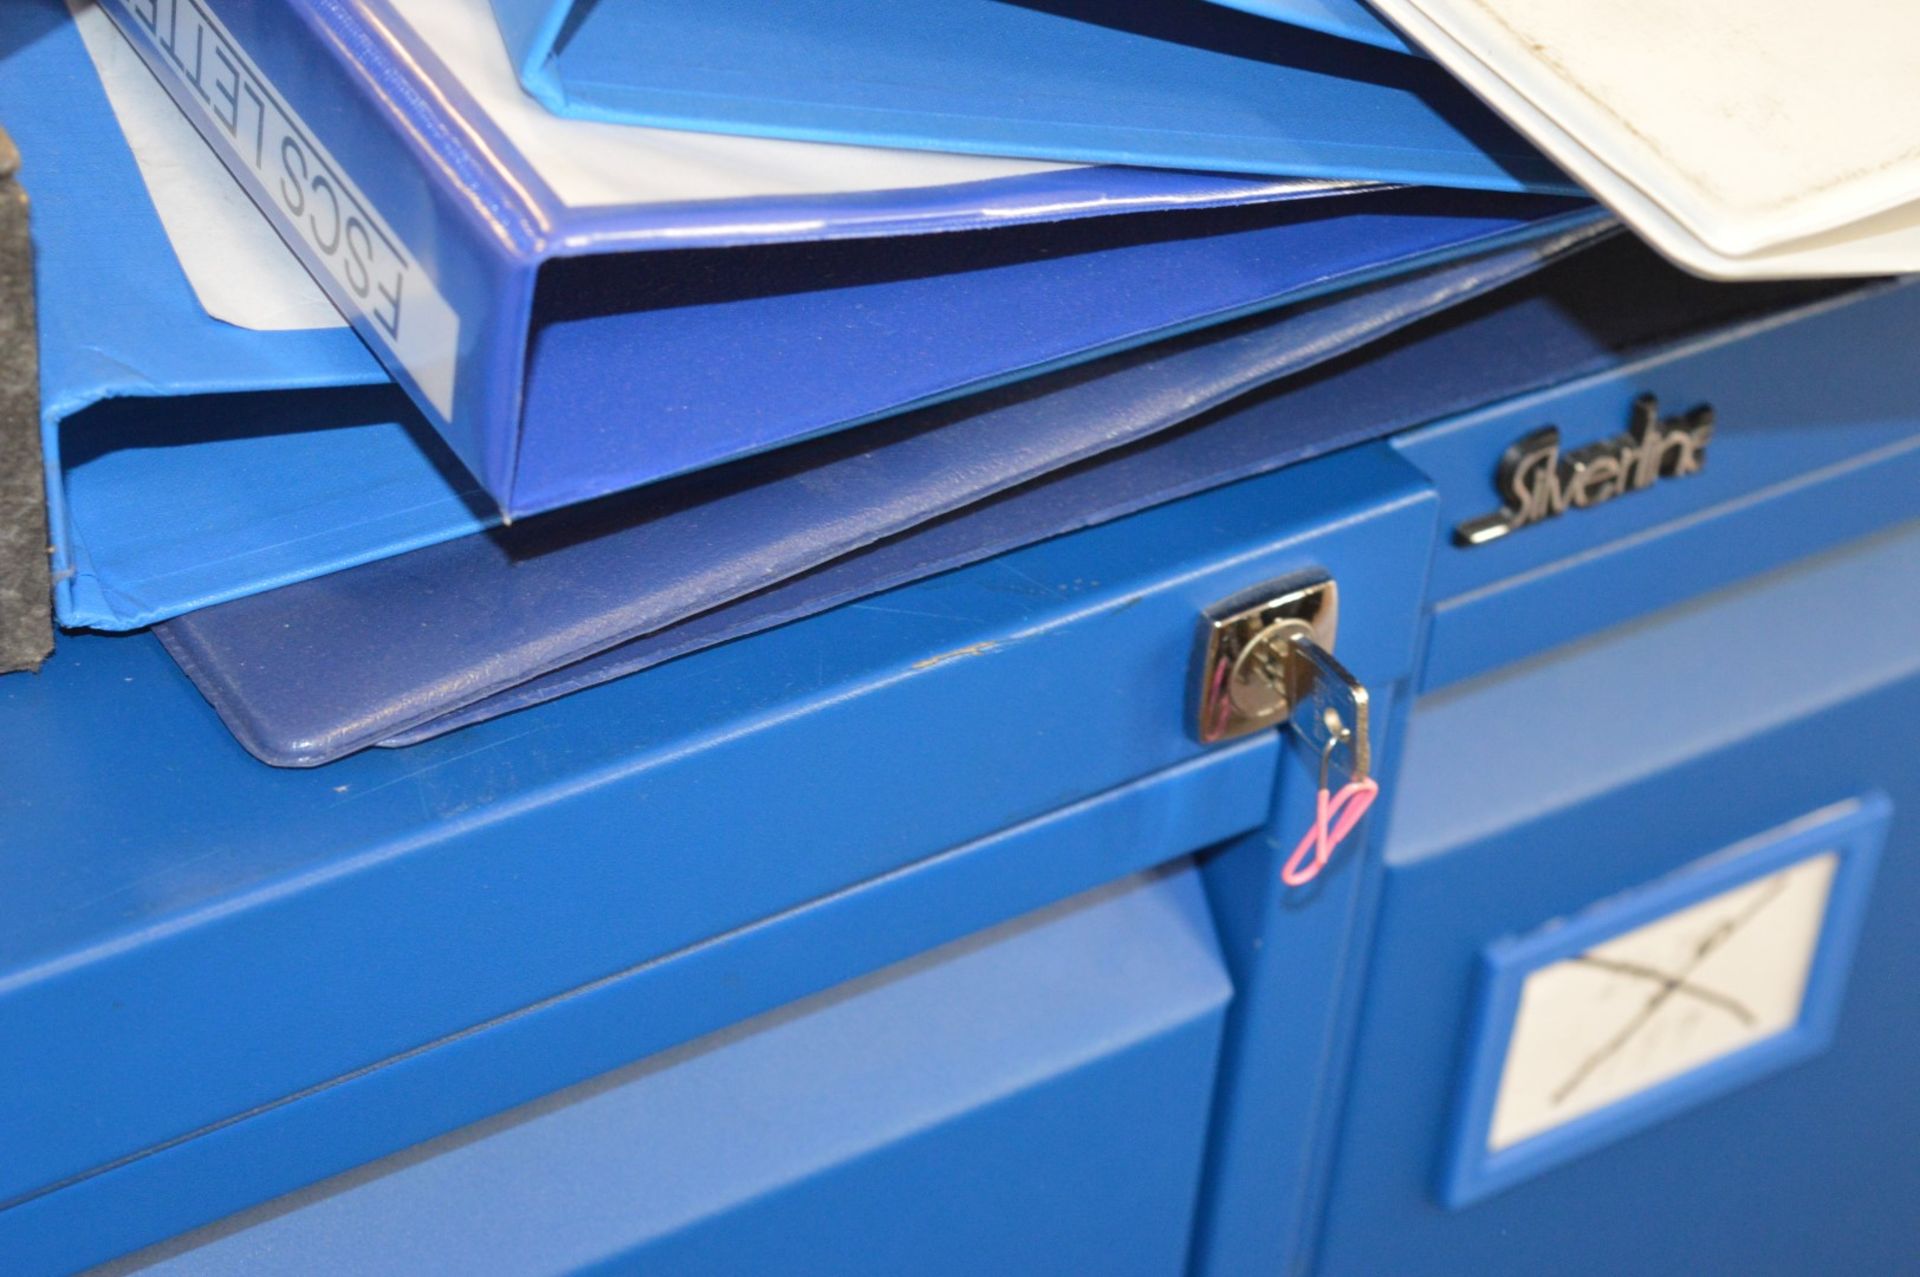 1 x Silverline Three Drawer Filing Cabinet - Includes Key - BLUE - Keep Your Important Documents - Image 2 of 3